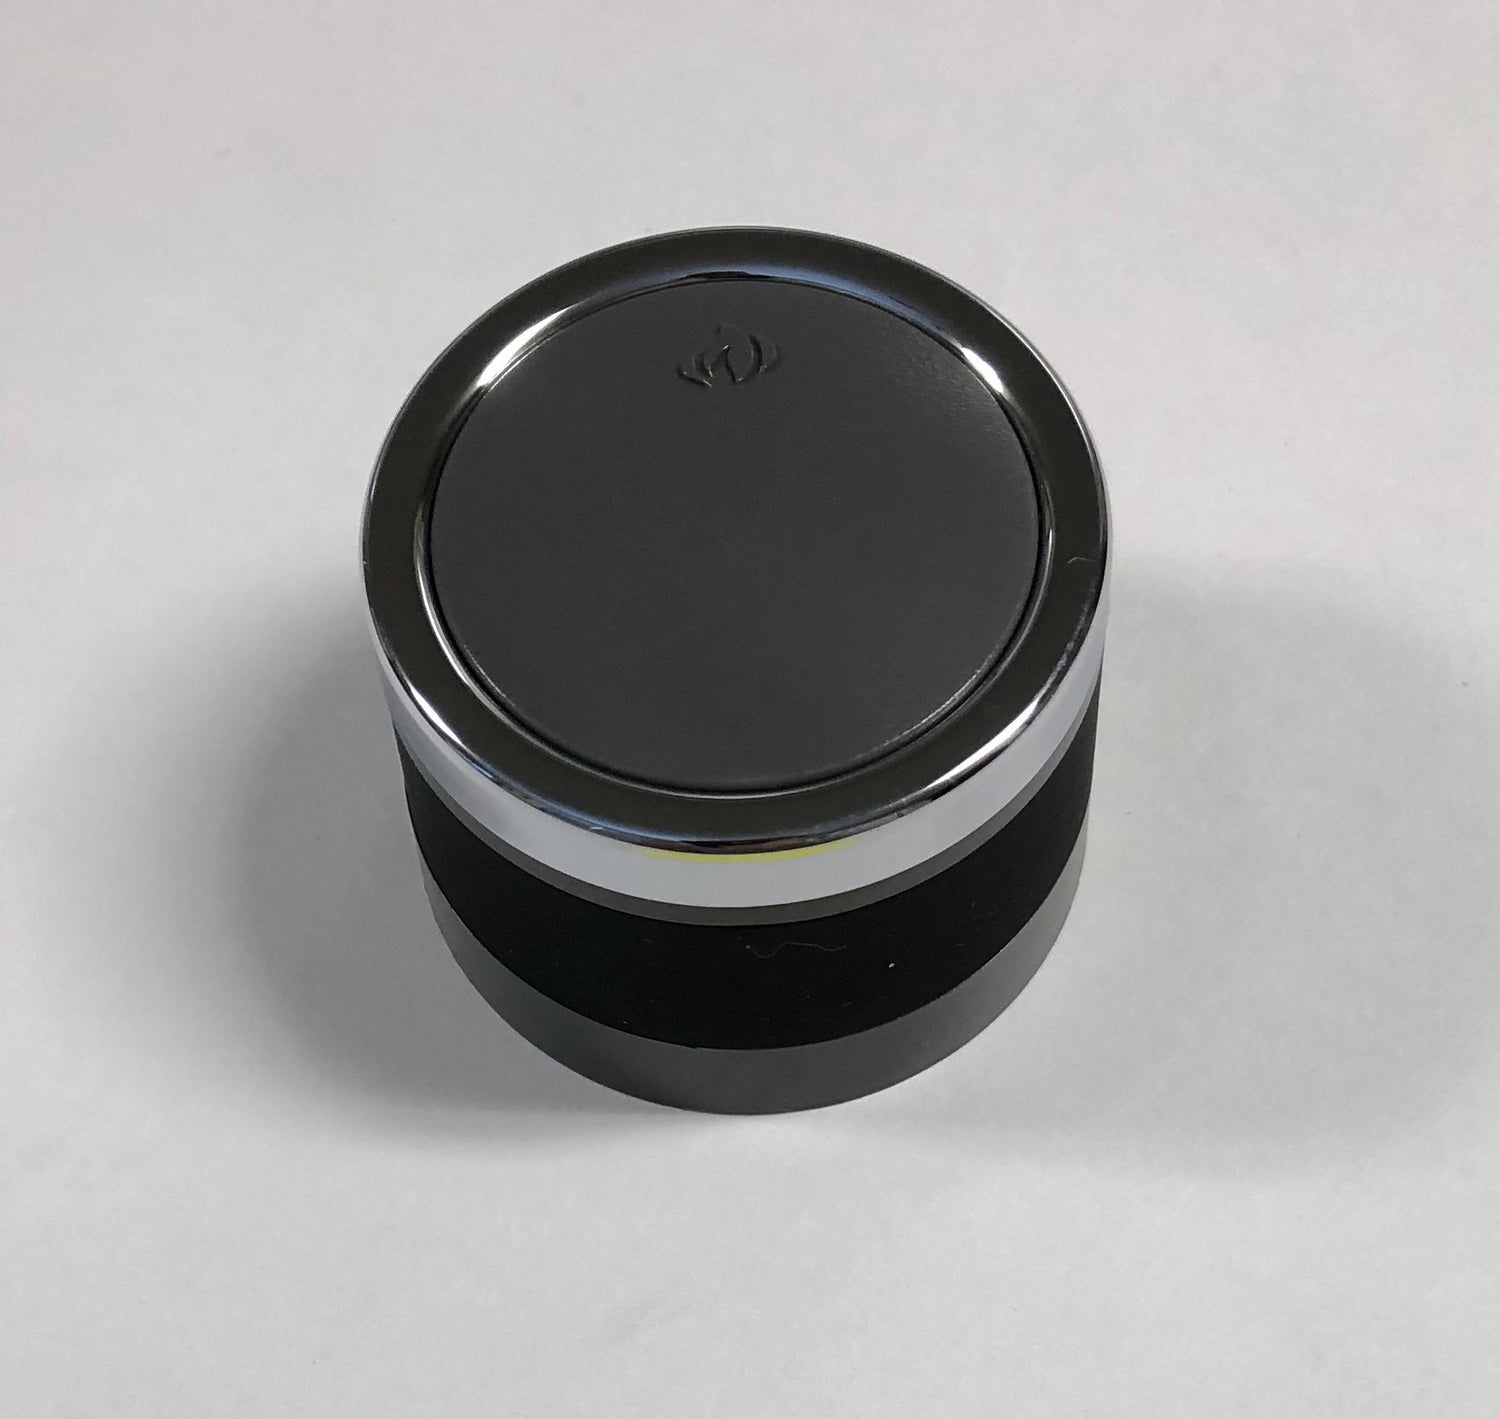 Napoleon S88007 Large Control Knob with Clear Flame. Available at Barbecues Galore: Burlington, Oakville, Etobicoke & Calgary.